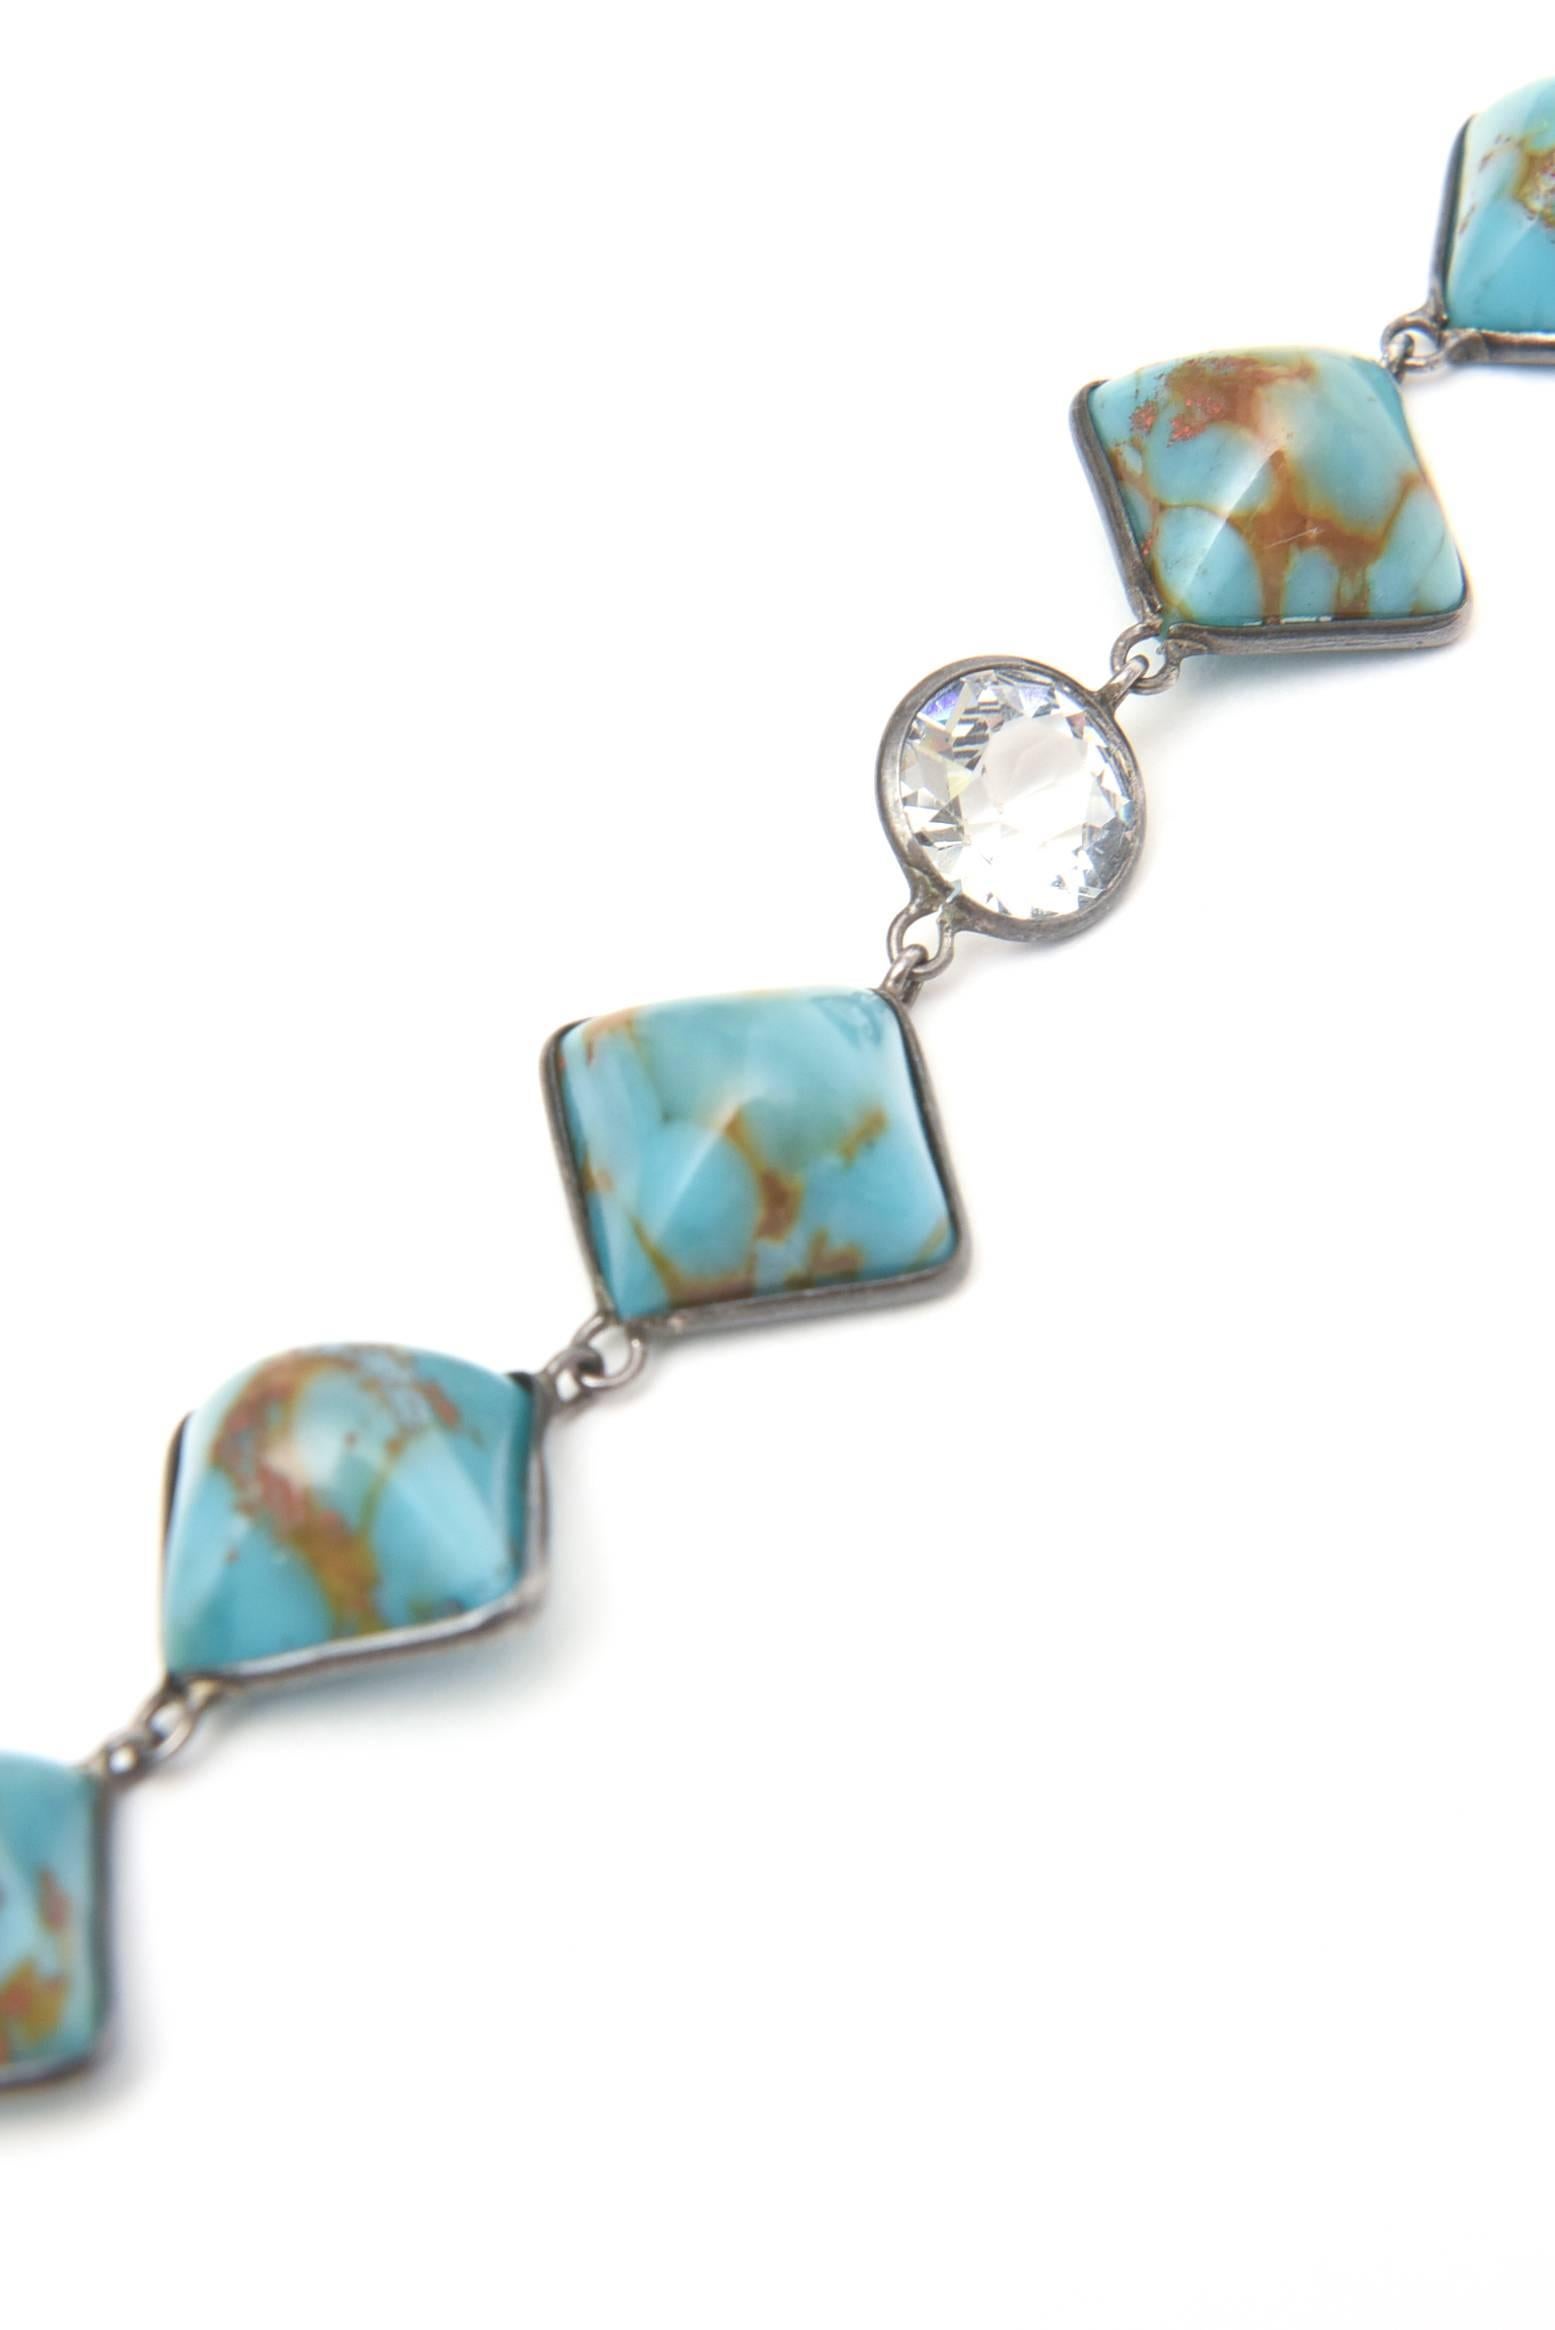 Diamond Shaped Turquoise & Faceted Crystal Pendant Long Necklace 1